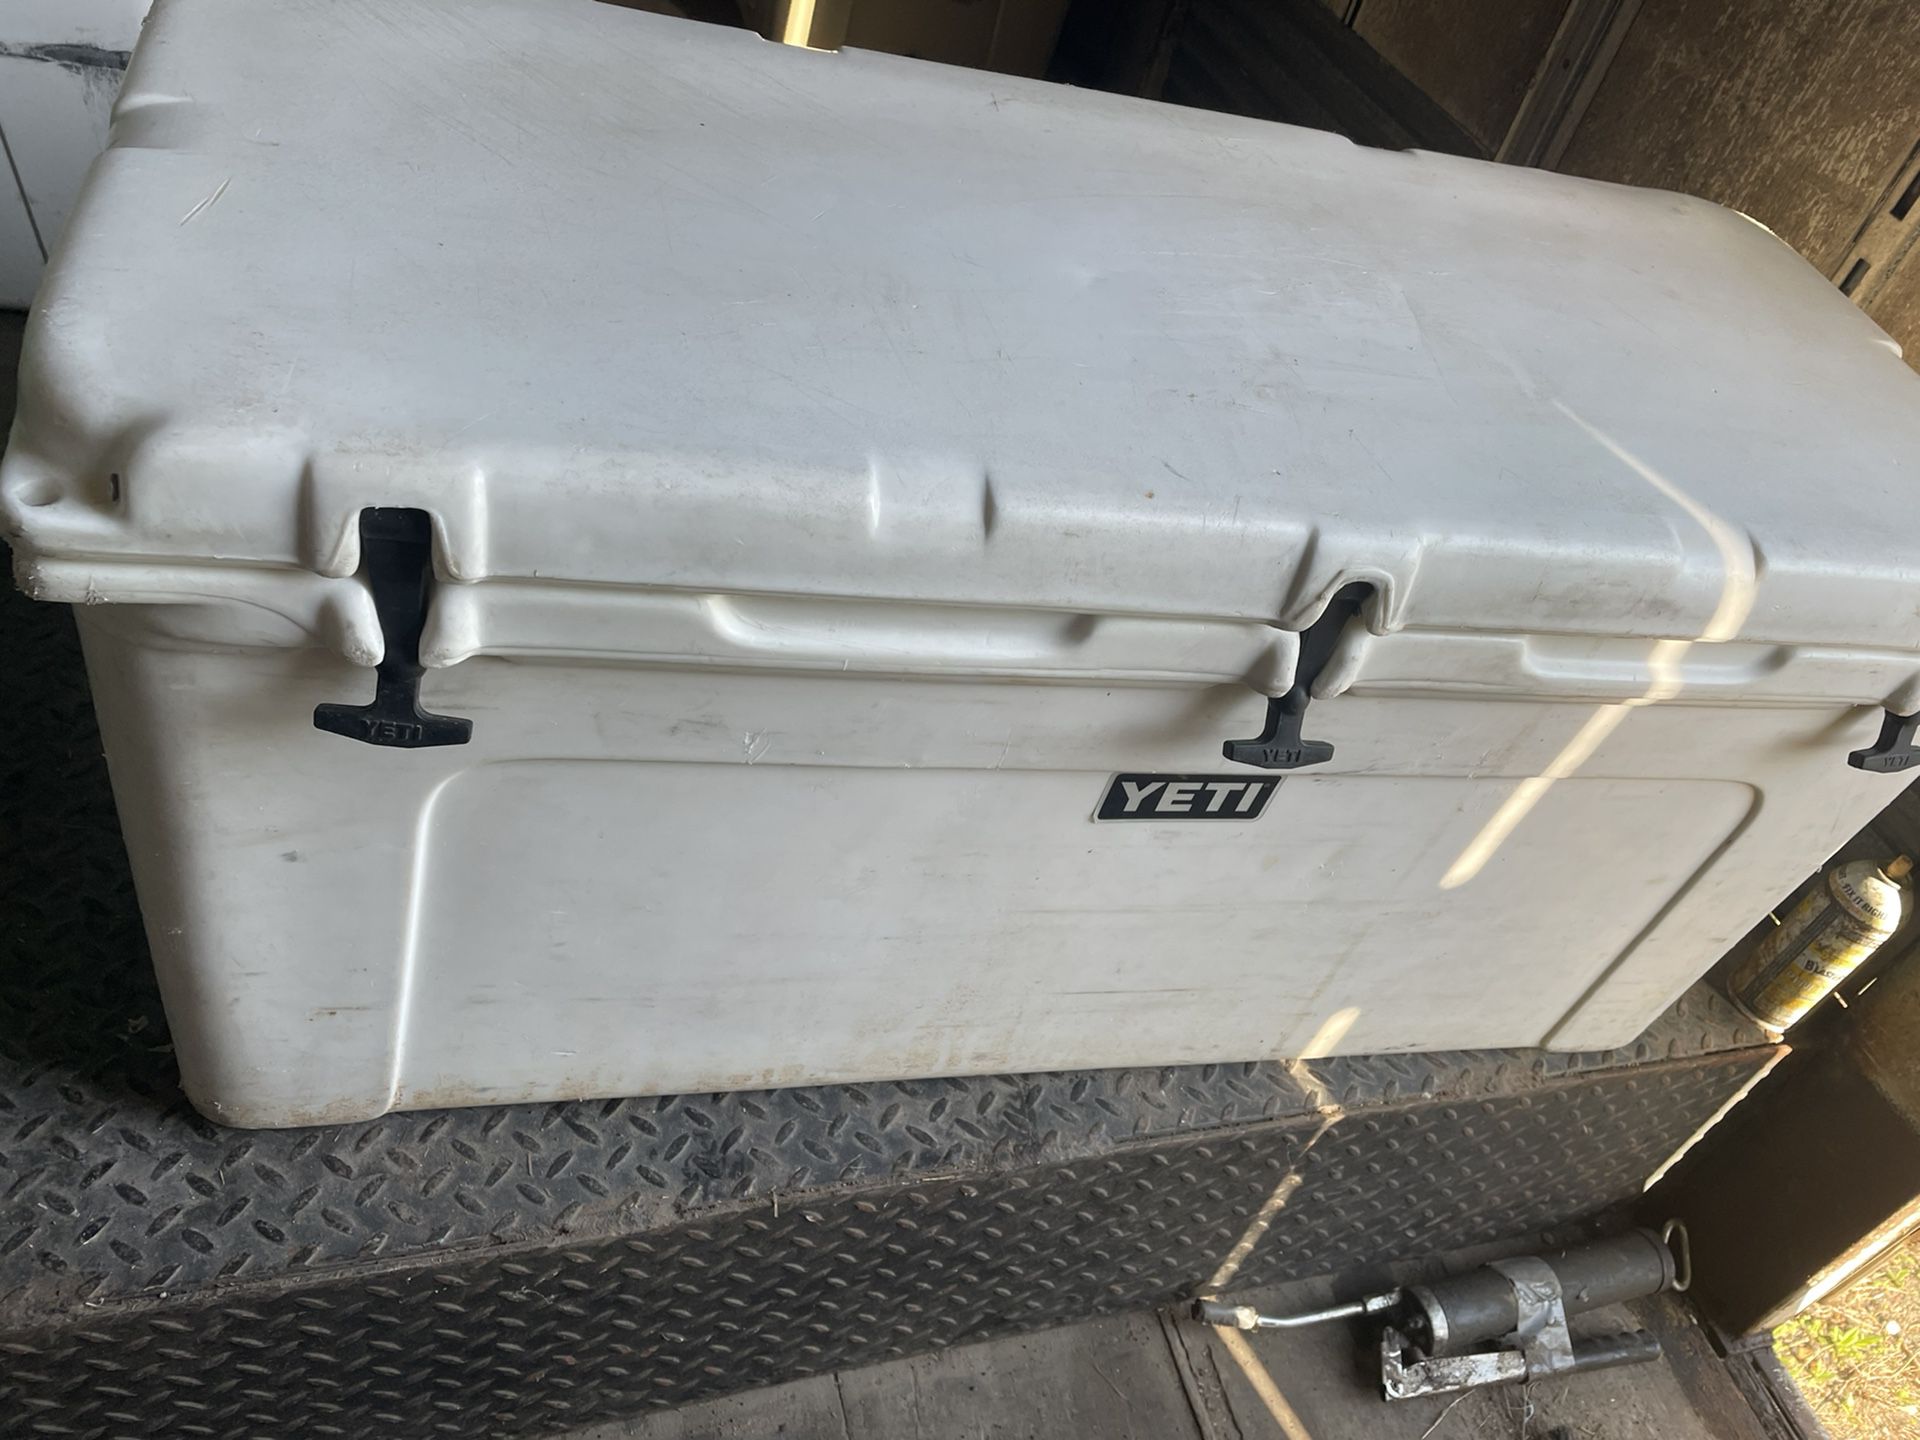 Yeti 110 cooler for Sale in Lake Oswego, OR - OfferUp